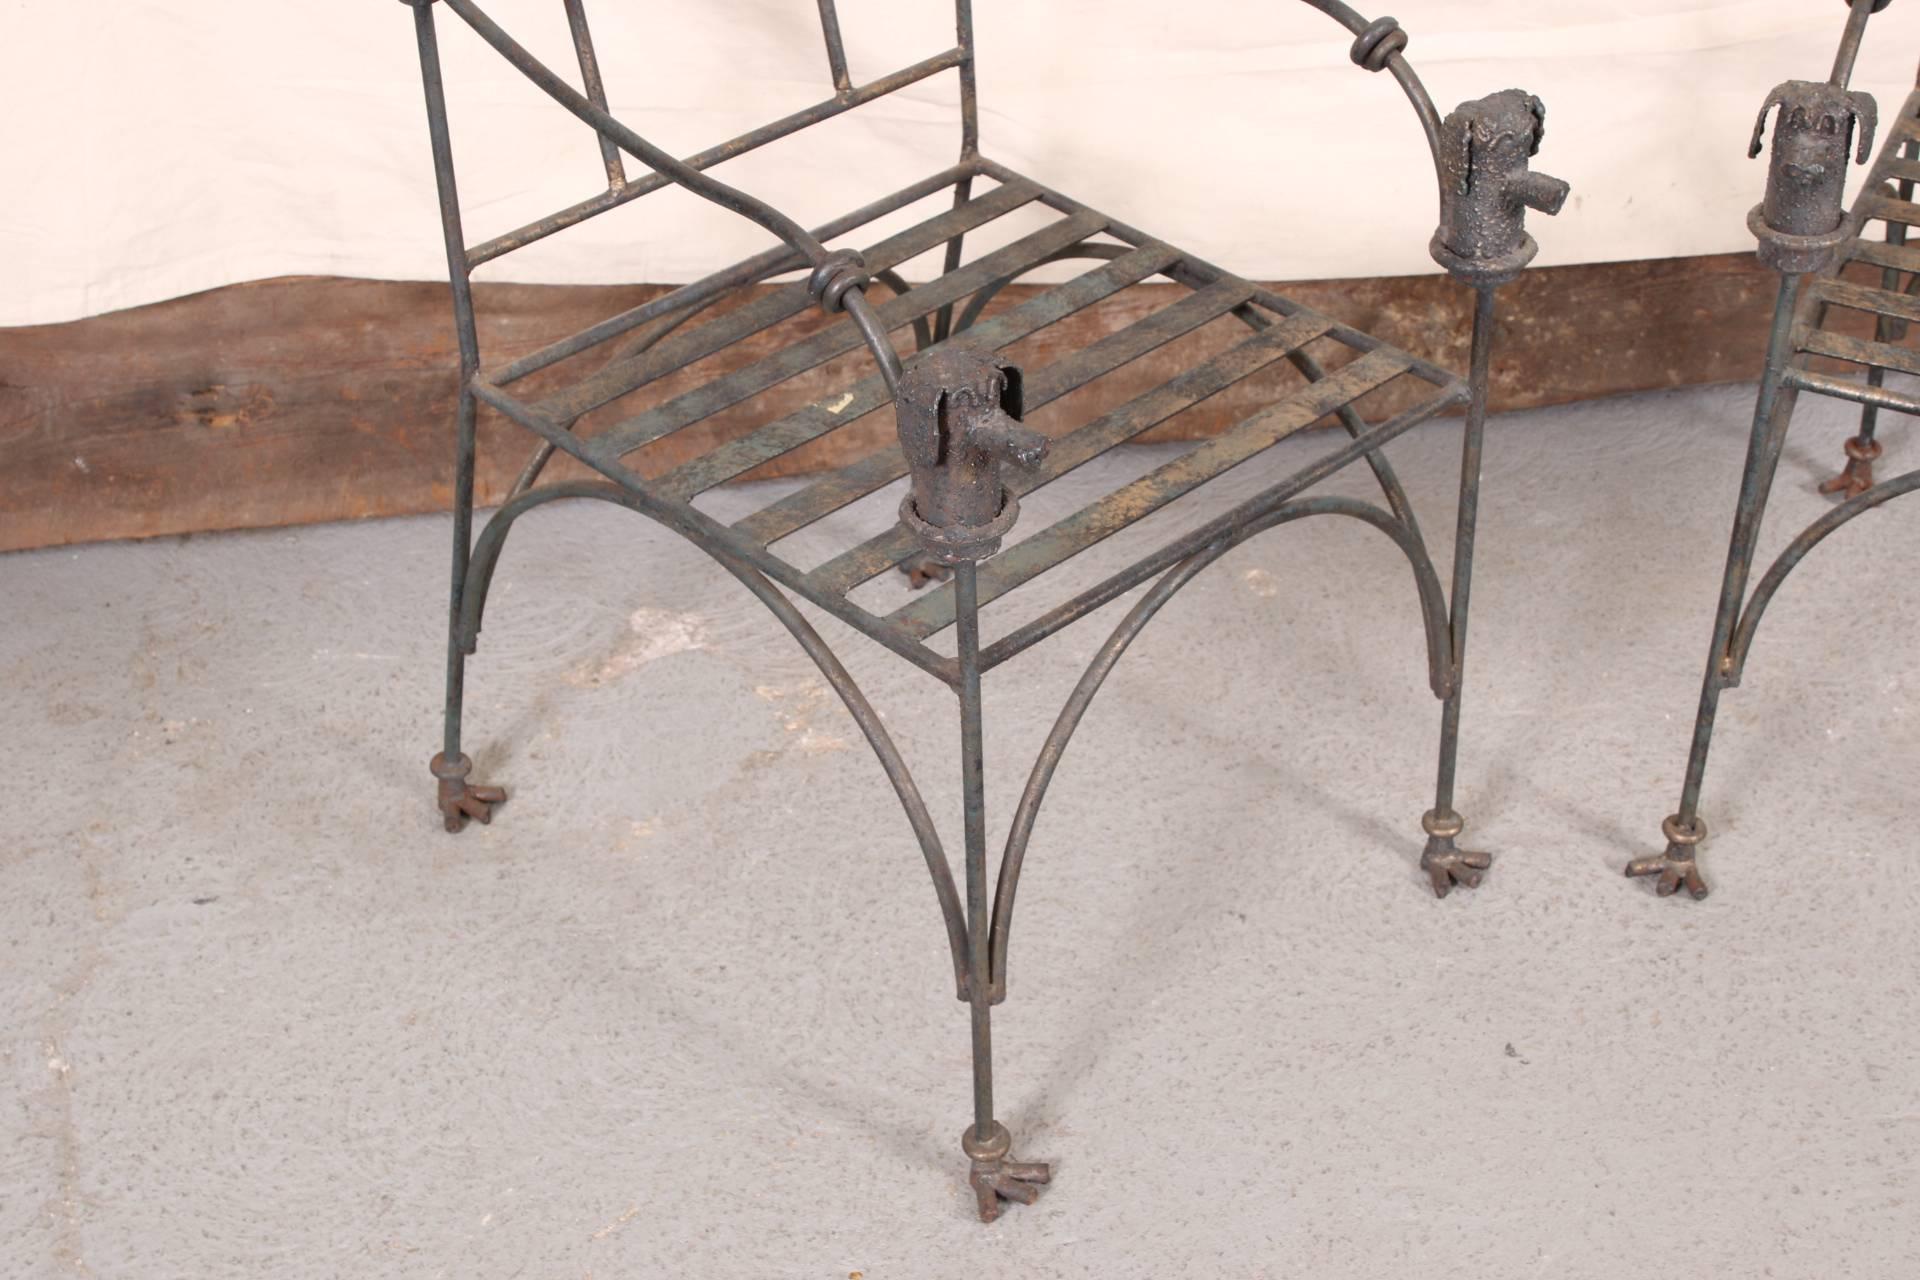 Heavy construction wrought iron with a golden patina, slatted seats, crest rails with a circle, and arm ends in the form of canine heads. The legs with curved stretchers on all sides and ending in bird feet.
Measures: Seat height is 17.25 inches.